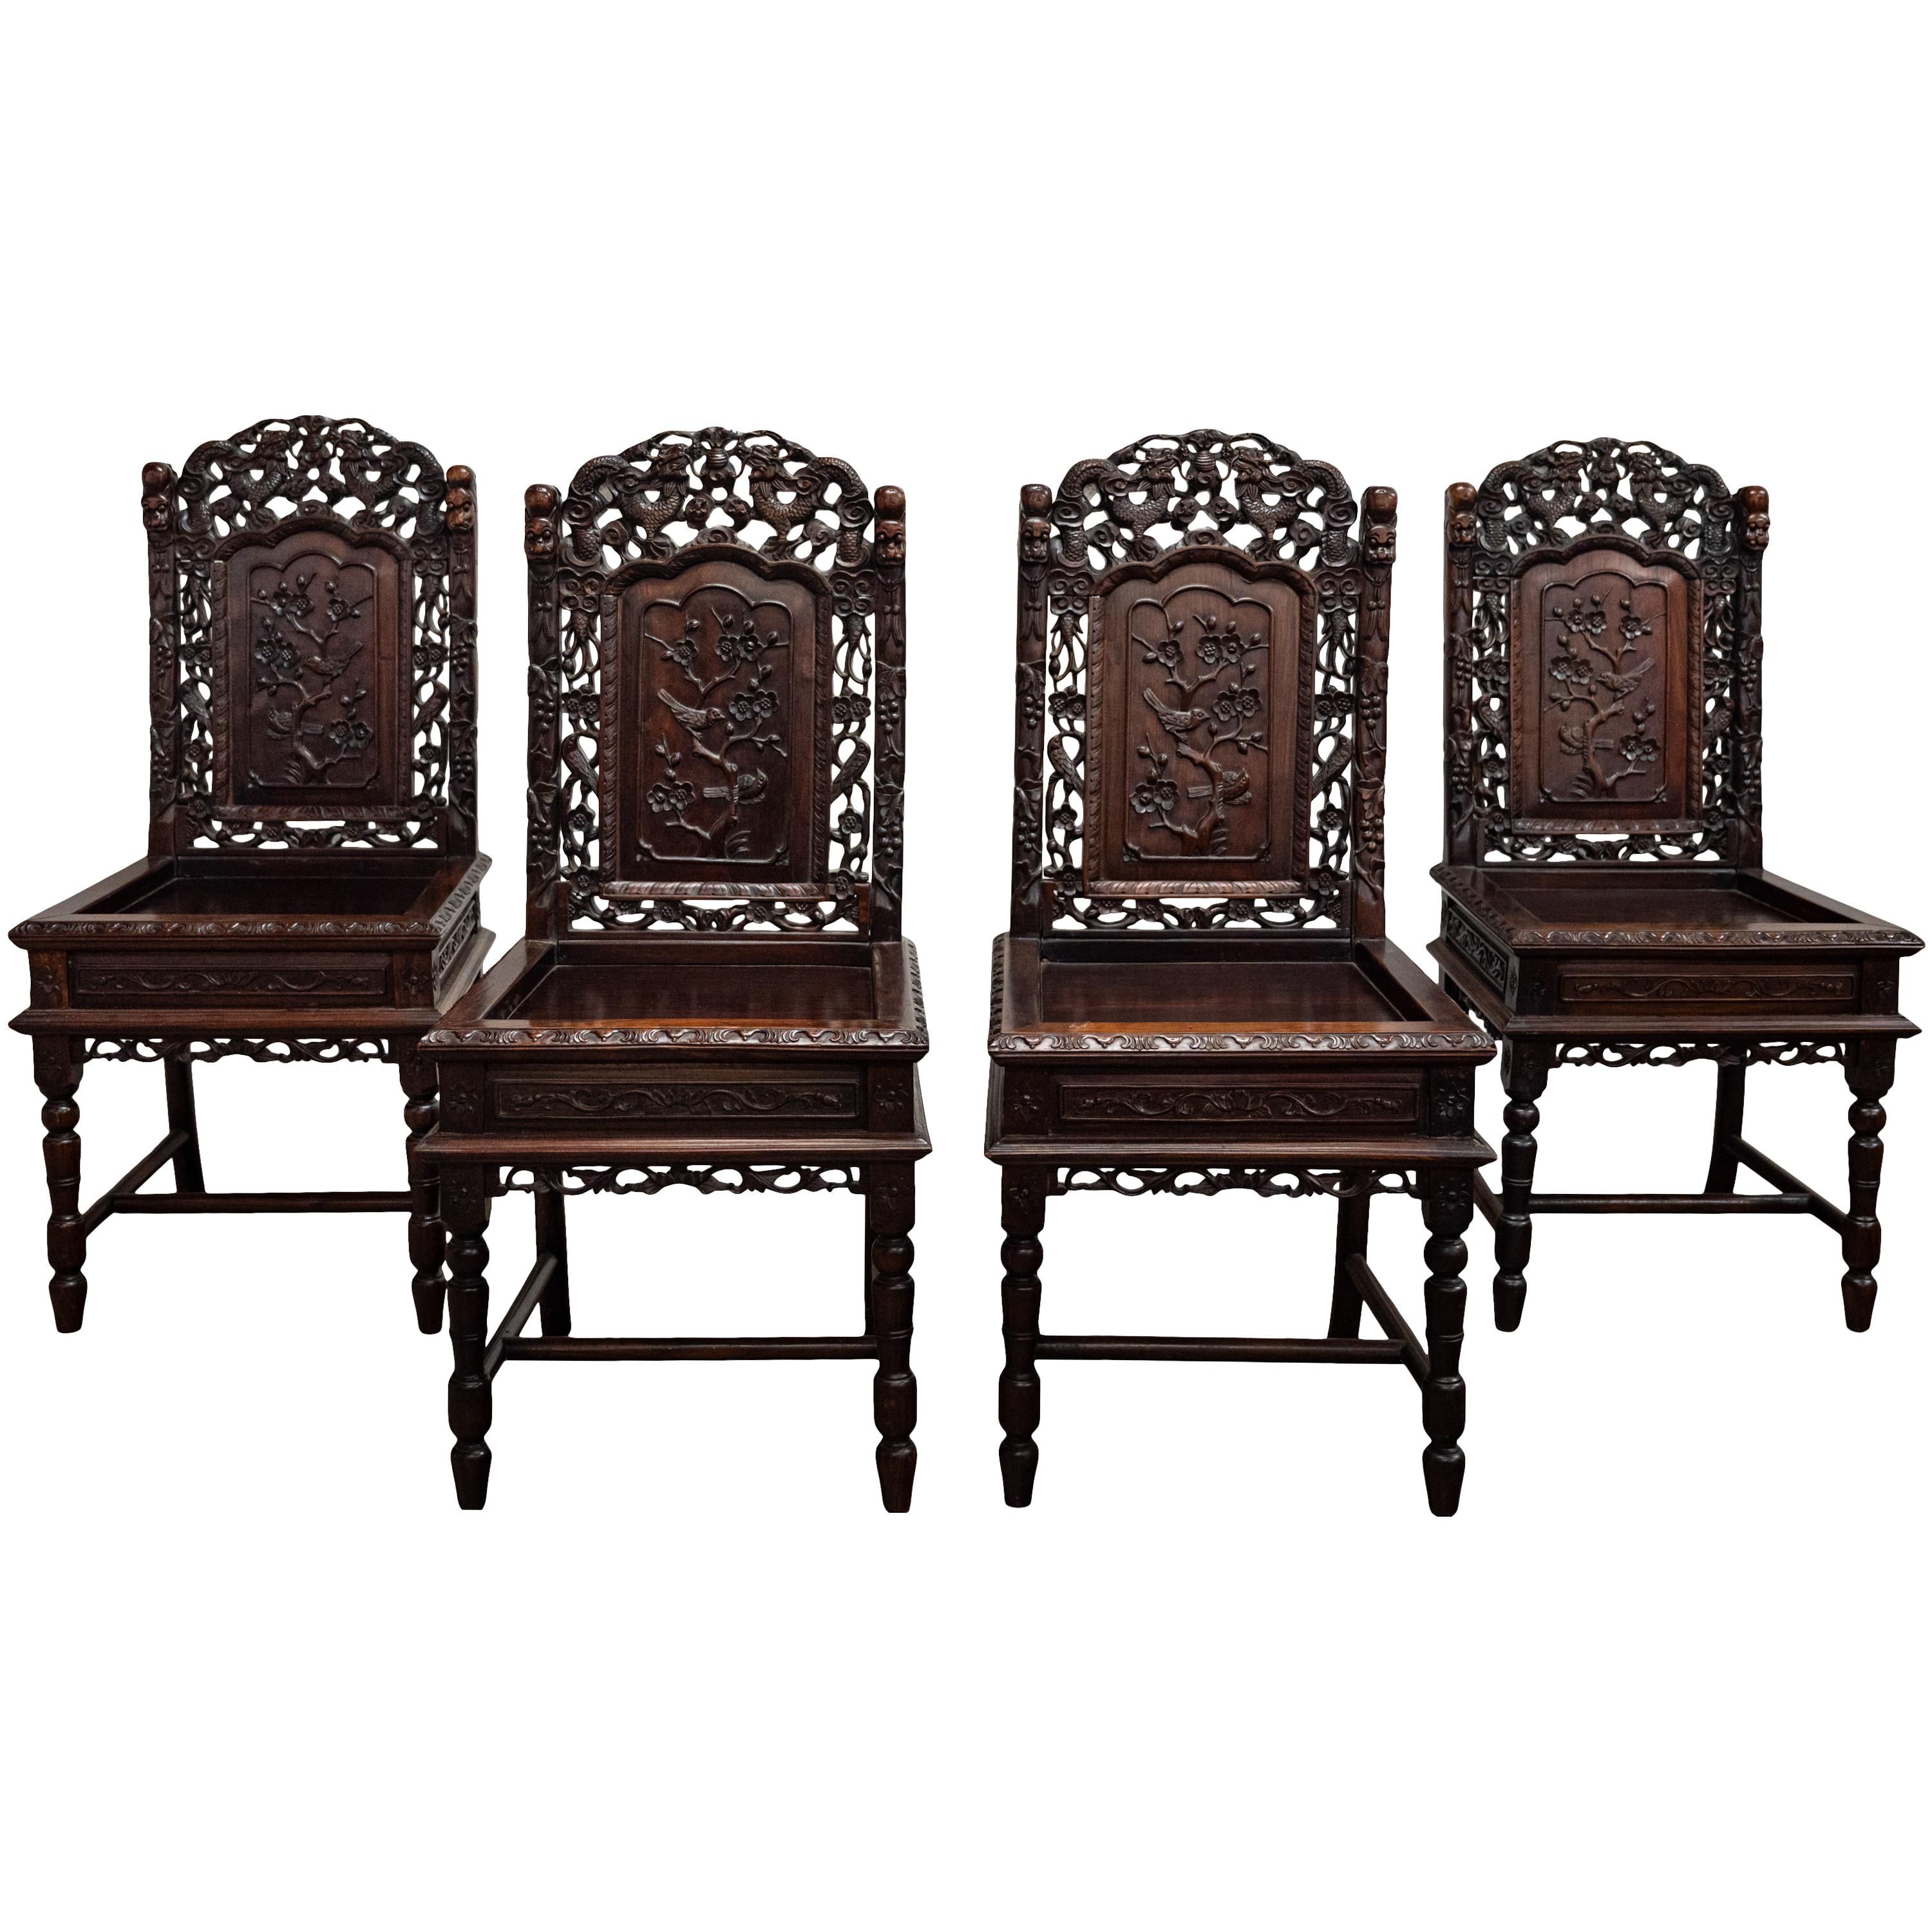 Four Antique Qing Dynasty Chinese Carved Rosewood Side Dining Dragon Chairs 1880 For Sale 3